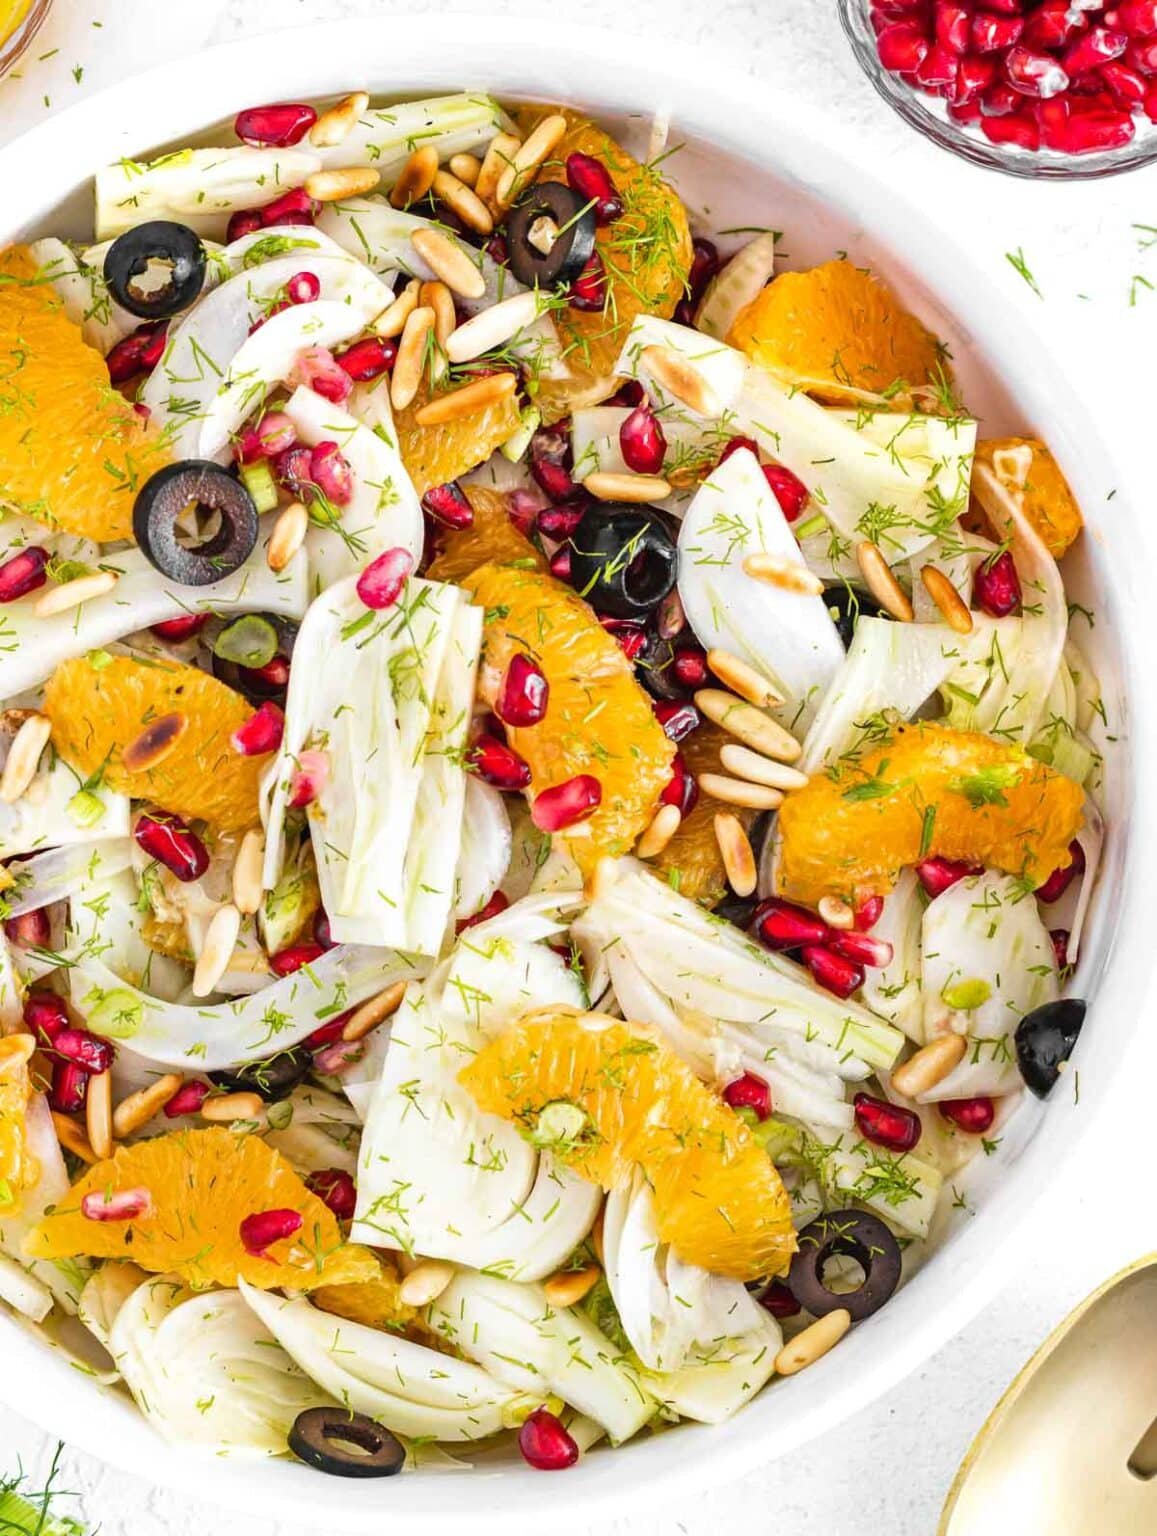 Fennel and Orange Salad is a perfect Holiday Side Dish